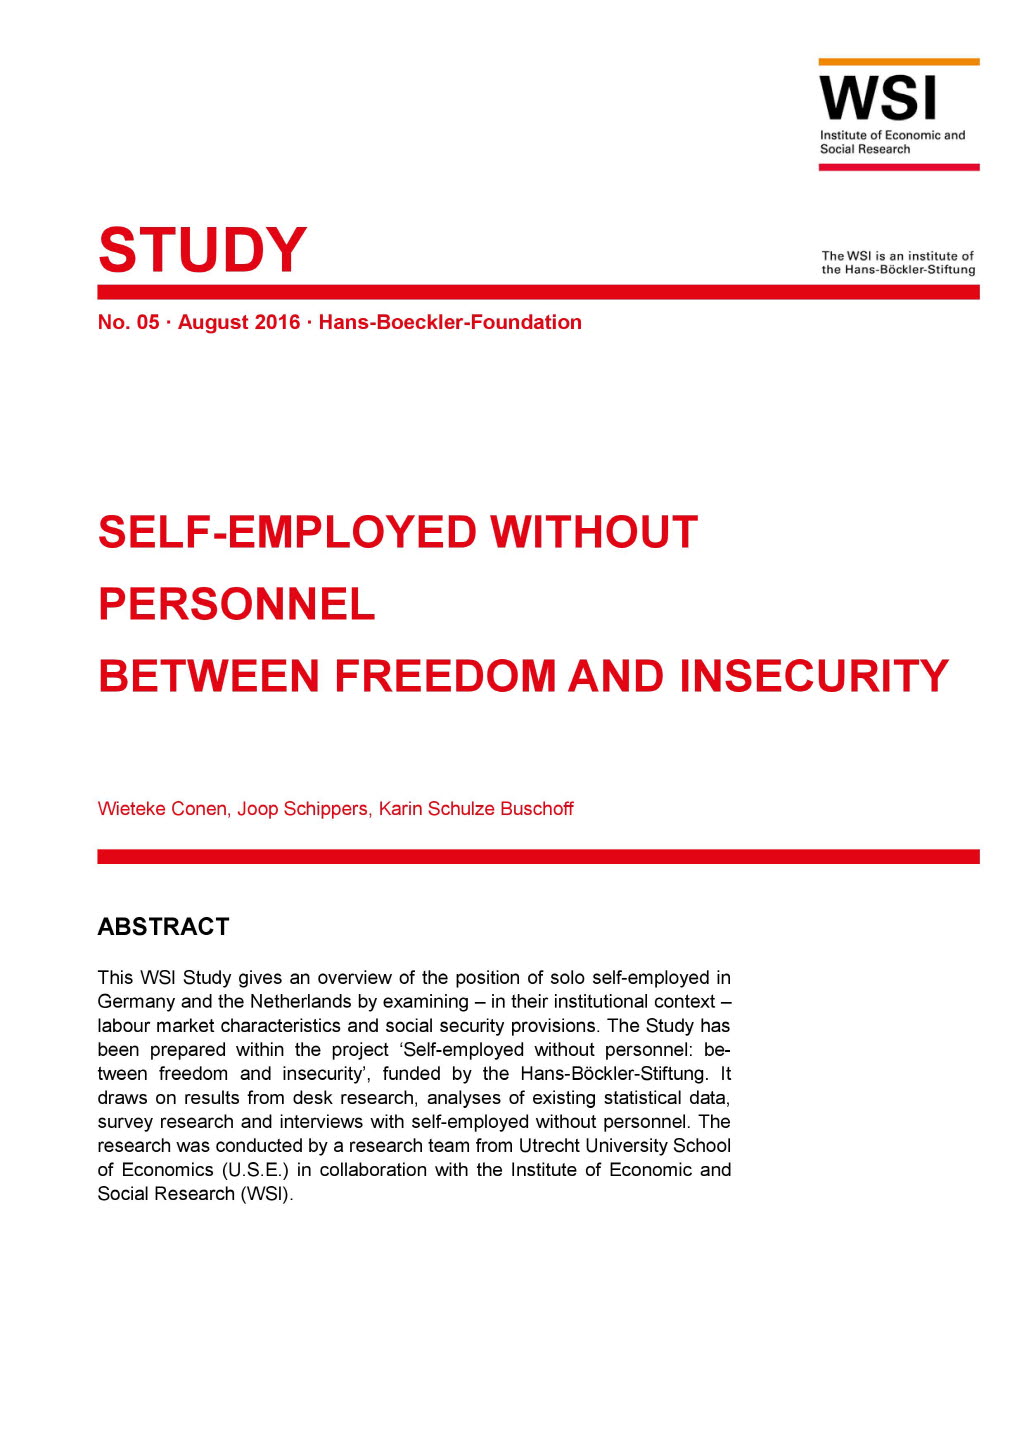 Self-employed without personnel between freedom and insecurity